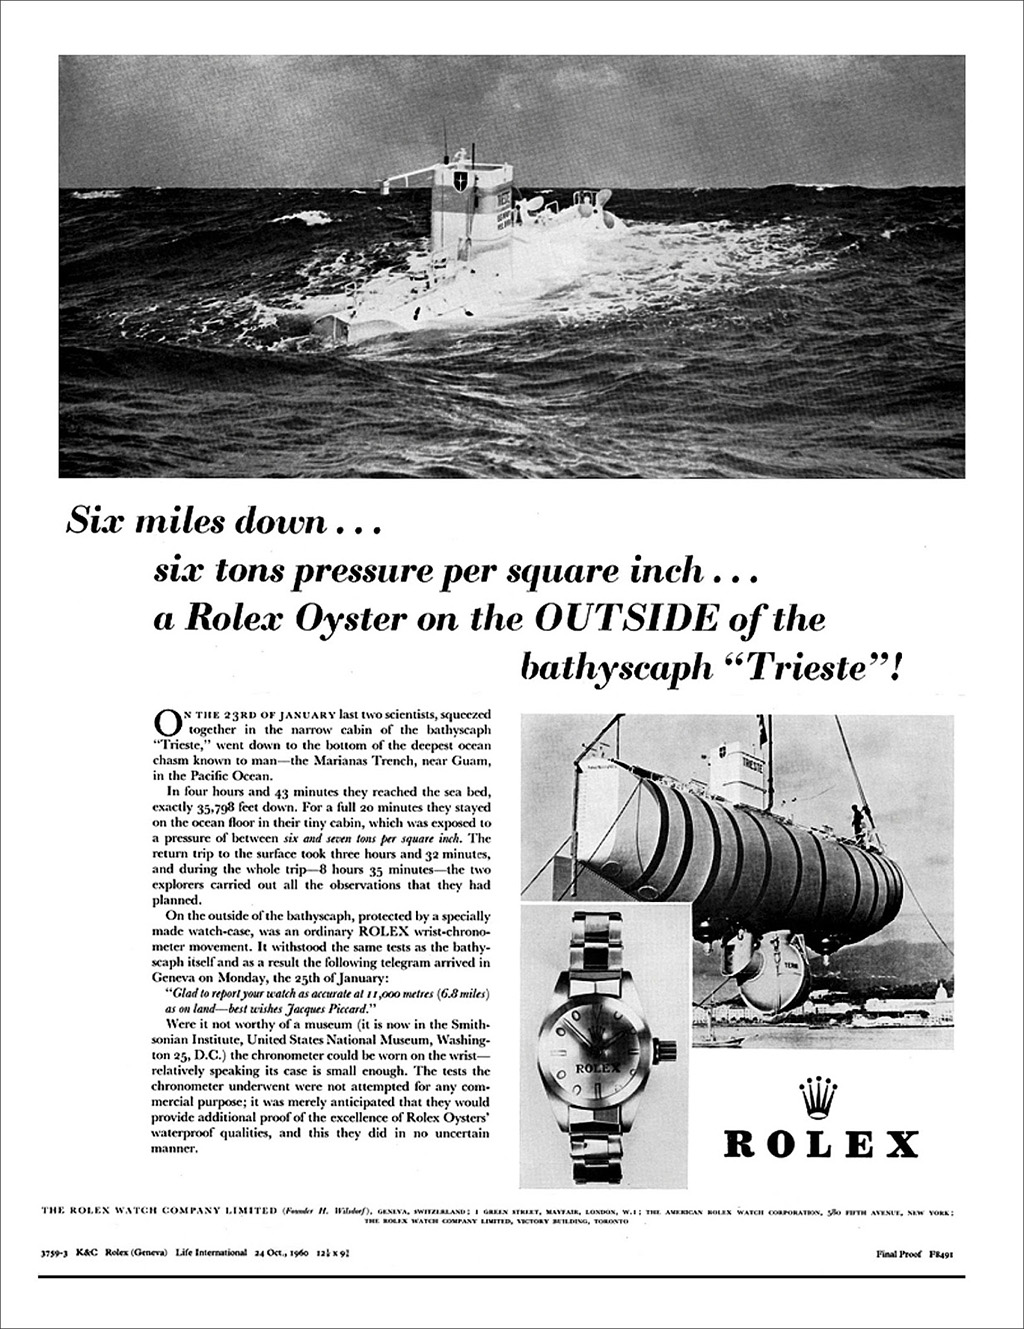 Rolex advertisement appearing on Life Magazine on October 24, 1960, documenting the dive.